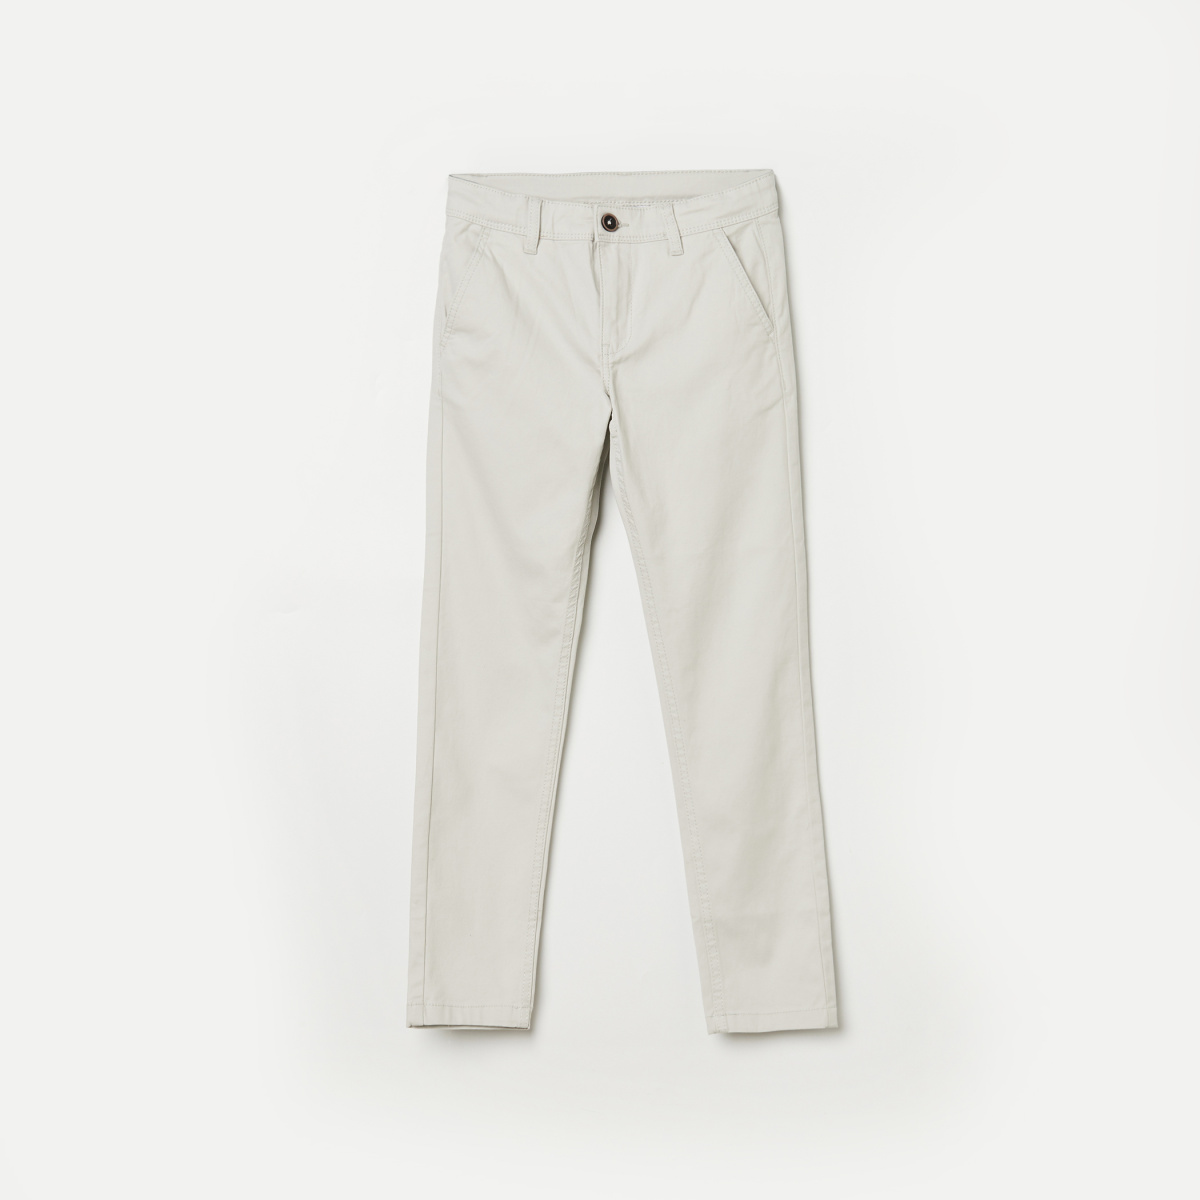 Fame Forever by Lifestyle Khaki Regular Fit Chinos